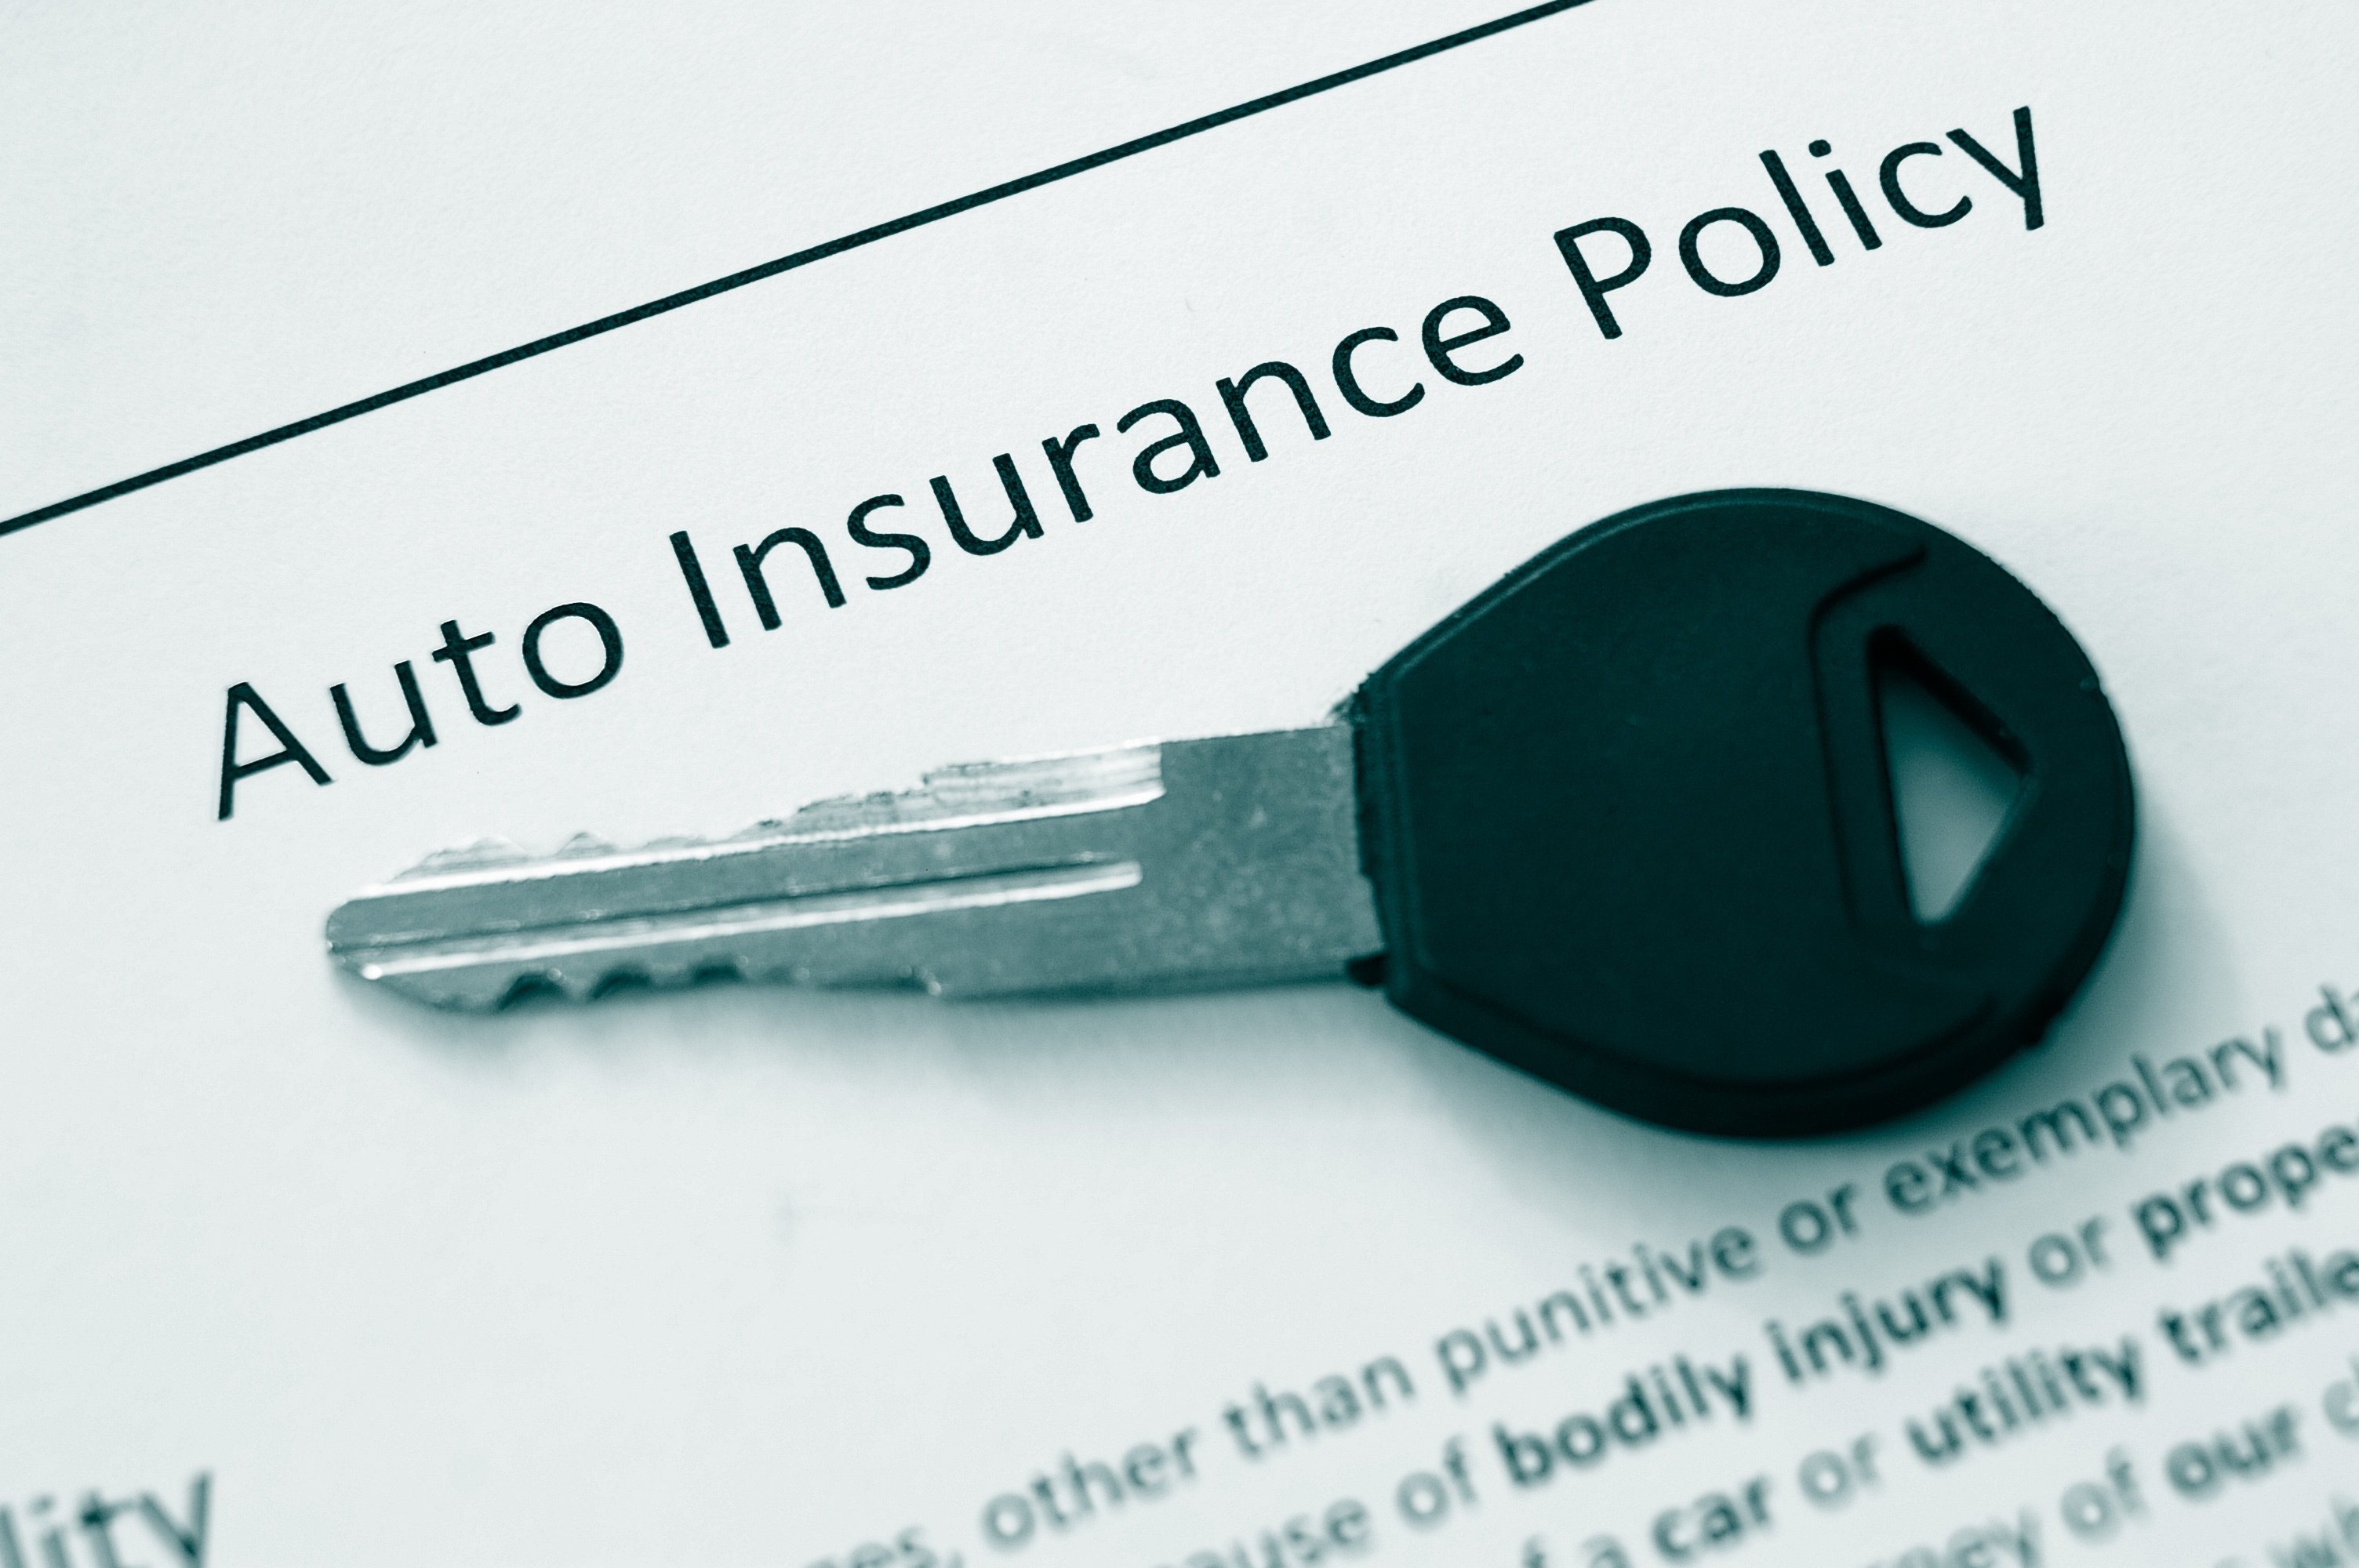 What Documents Do You Need To Provide When Looking For Automobile Insurance In Hialeah, FL?